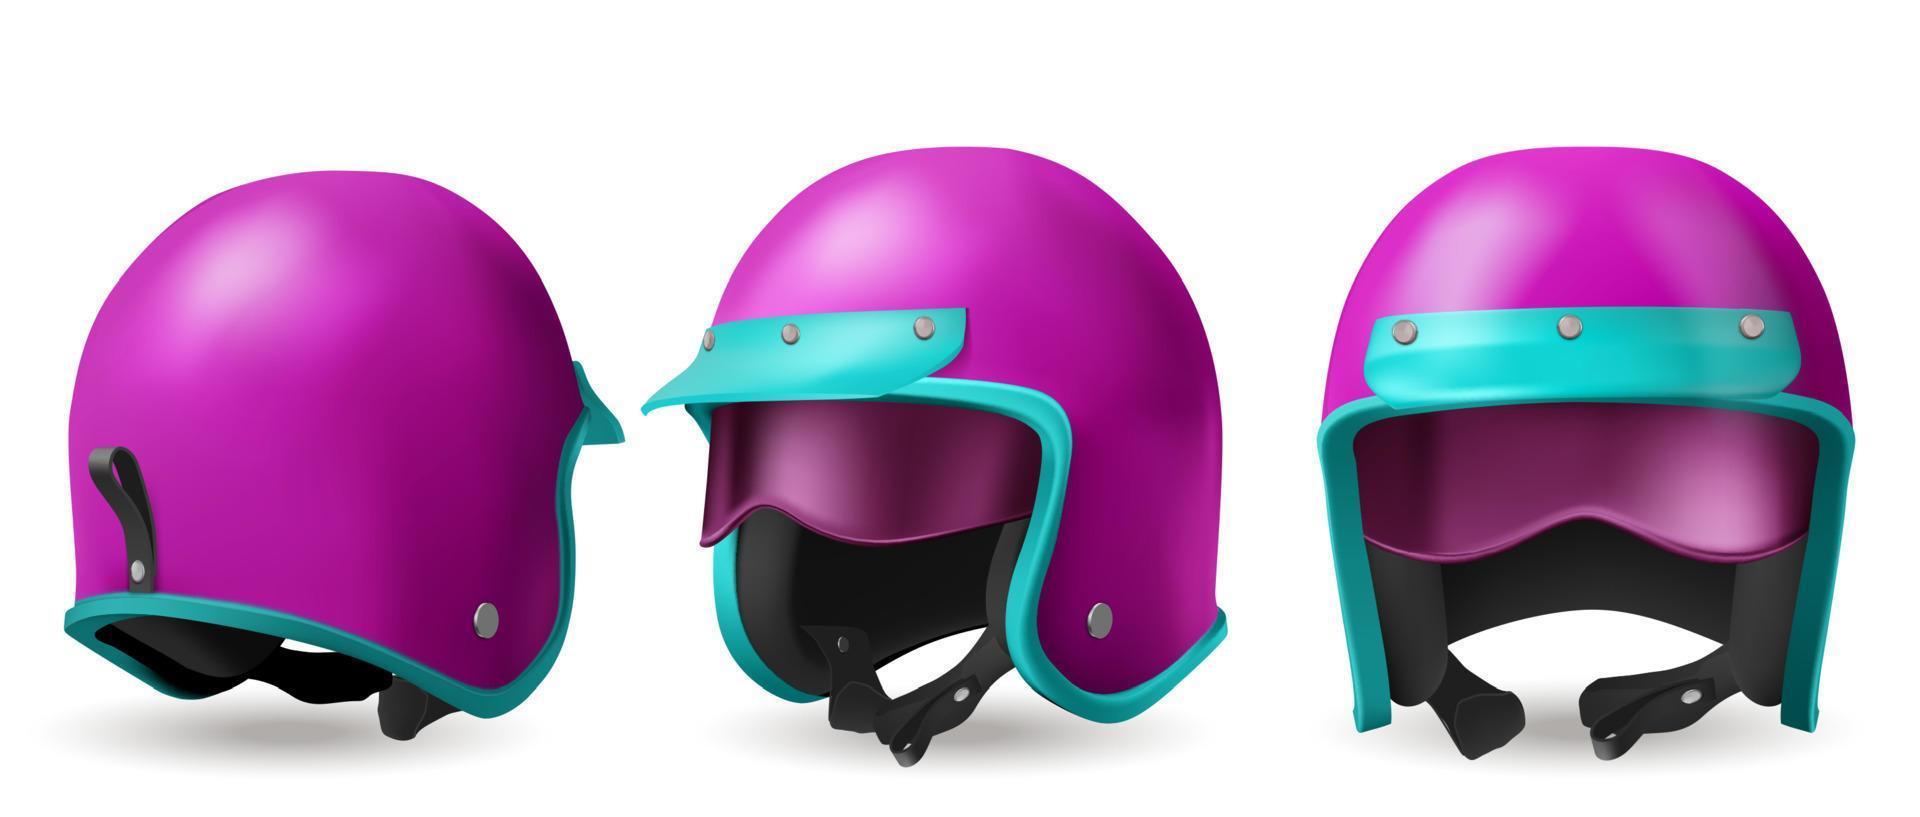 Motorcycle helmet for race and ride on scooter vector